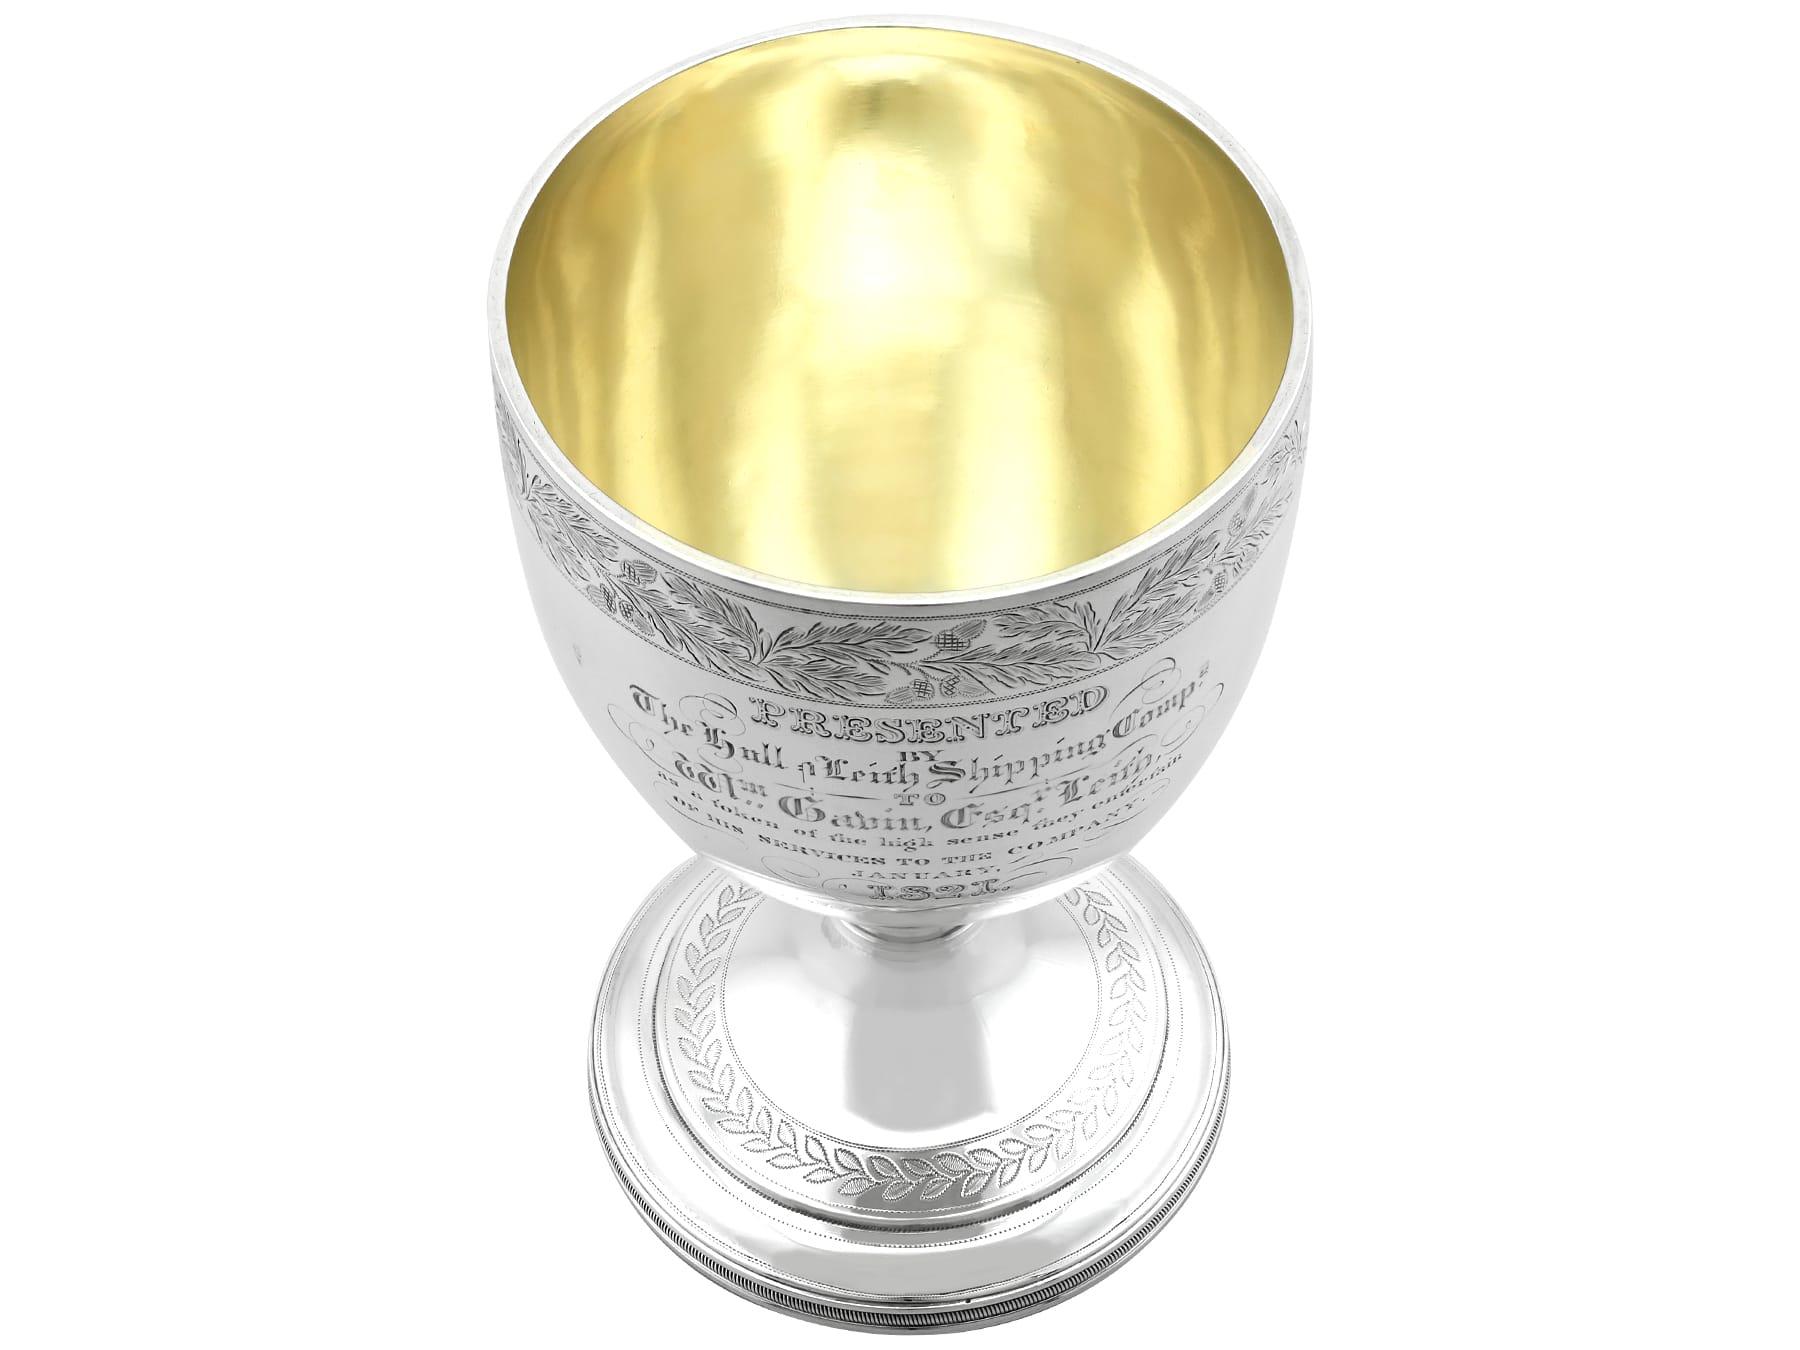 An exceptional, fine and impressive antique George IV Scottish sterling silver goblet; an addition to our collection of drinks related silverware.

This exceptional antique George IV Scottish sterling silver goblet has a circular bell-shaped form